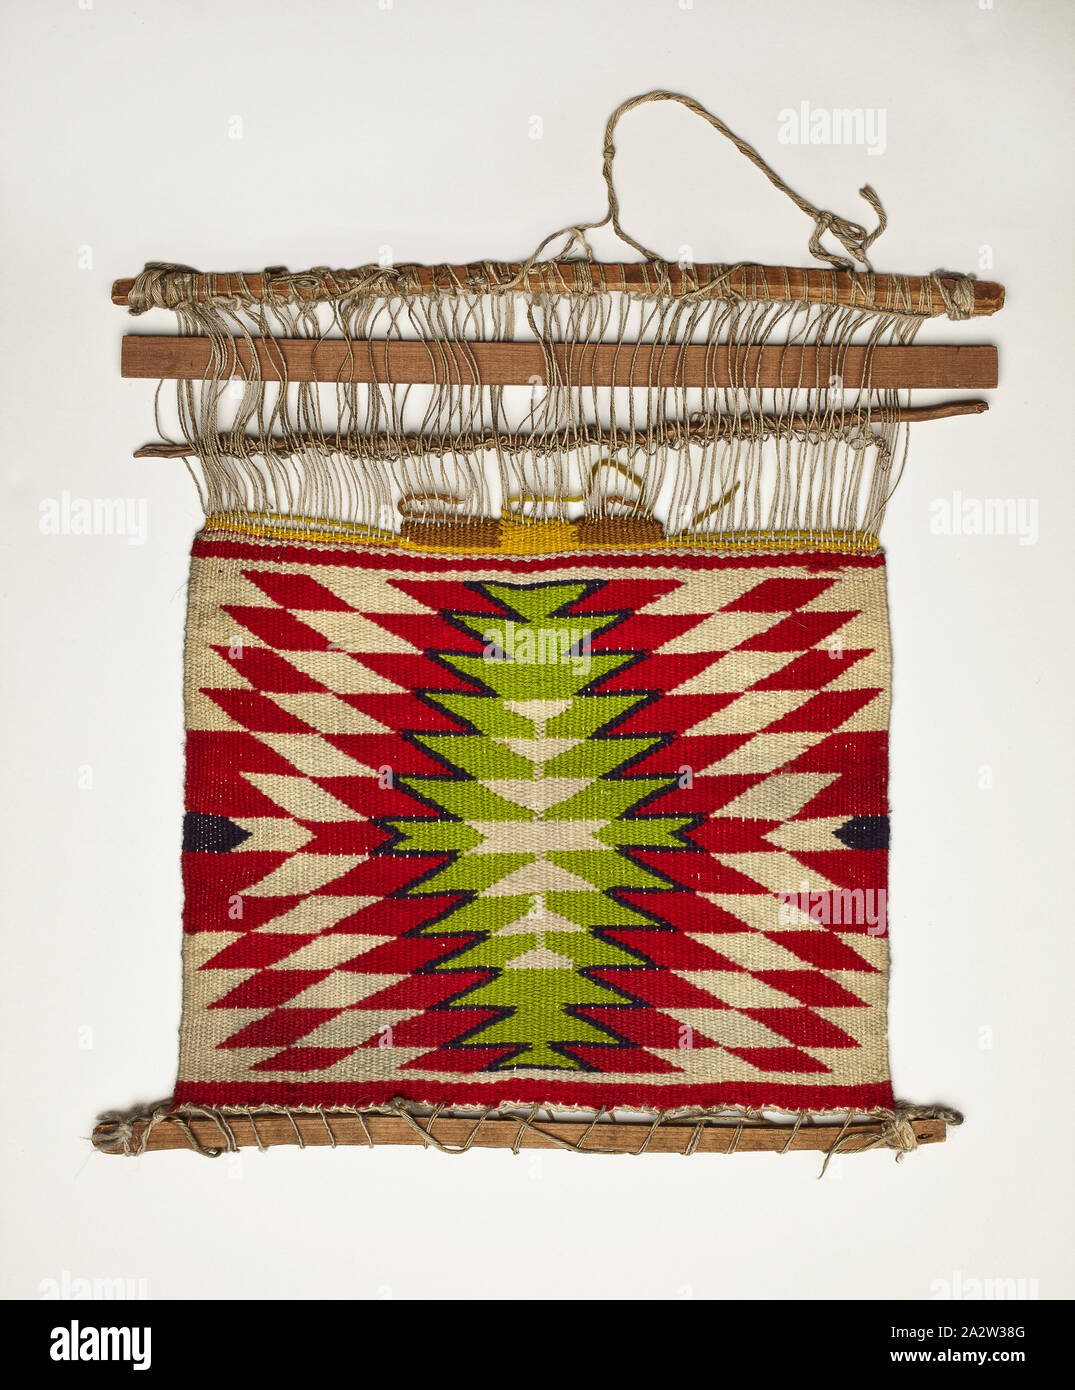 loom model, Navajo people, 1890-1920, wood, wool, cotton, 17-3/4 x 18 x 3/4 in., Textile and Fashion Arts Stock Photo